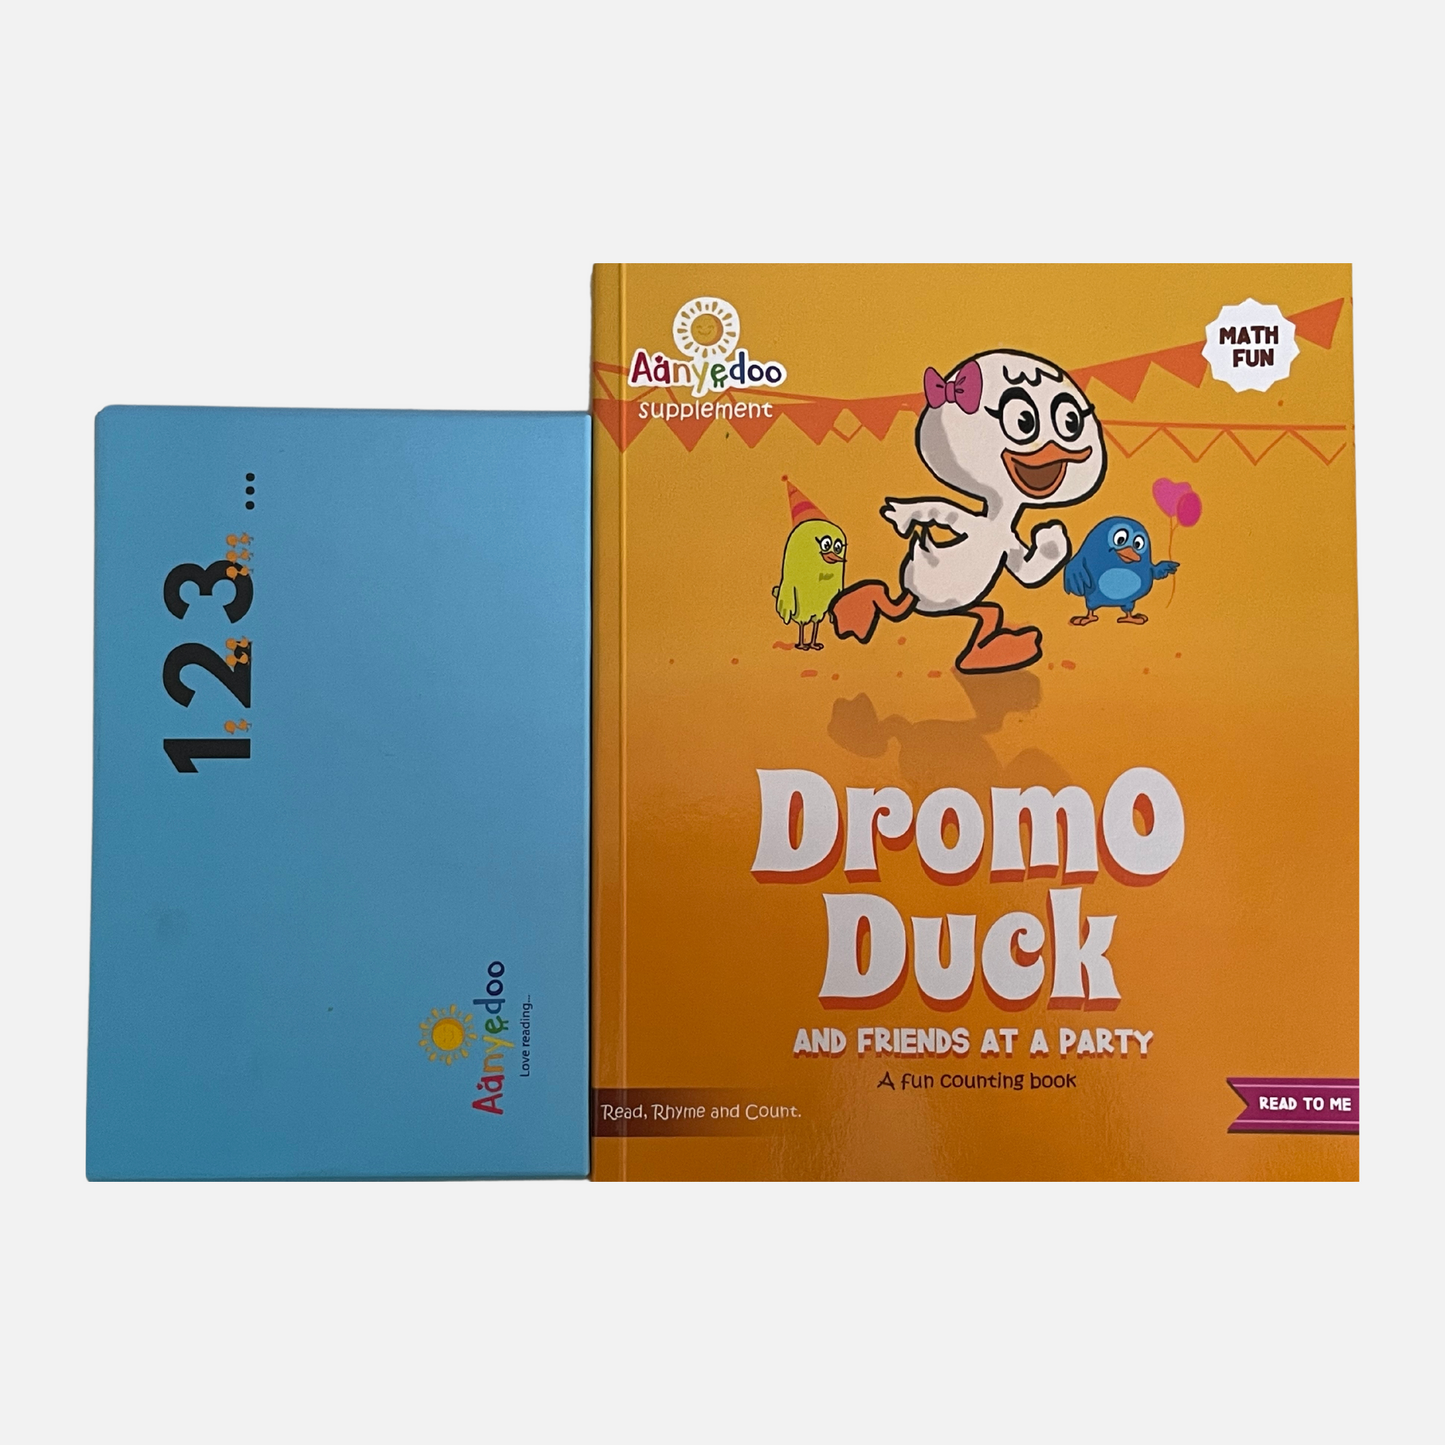 Dromo duck and friends at a party + Counting flashcard